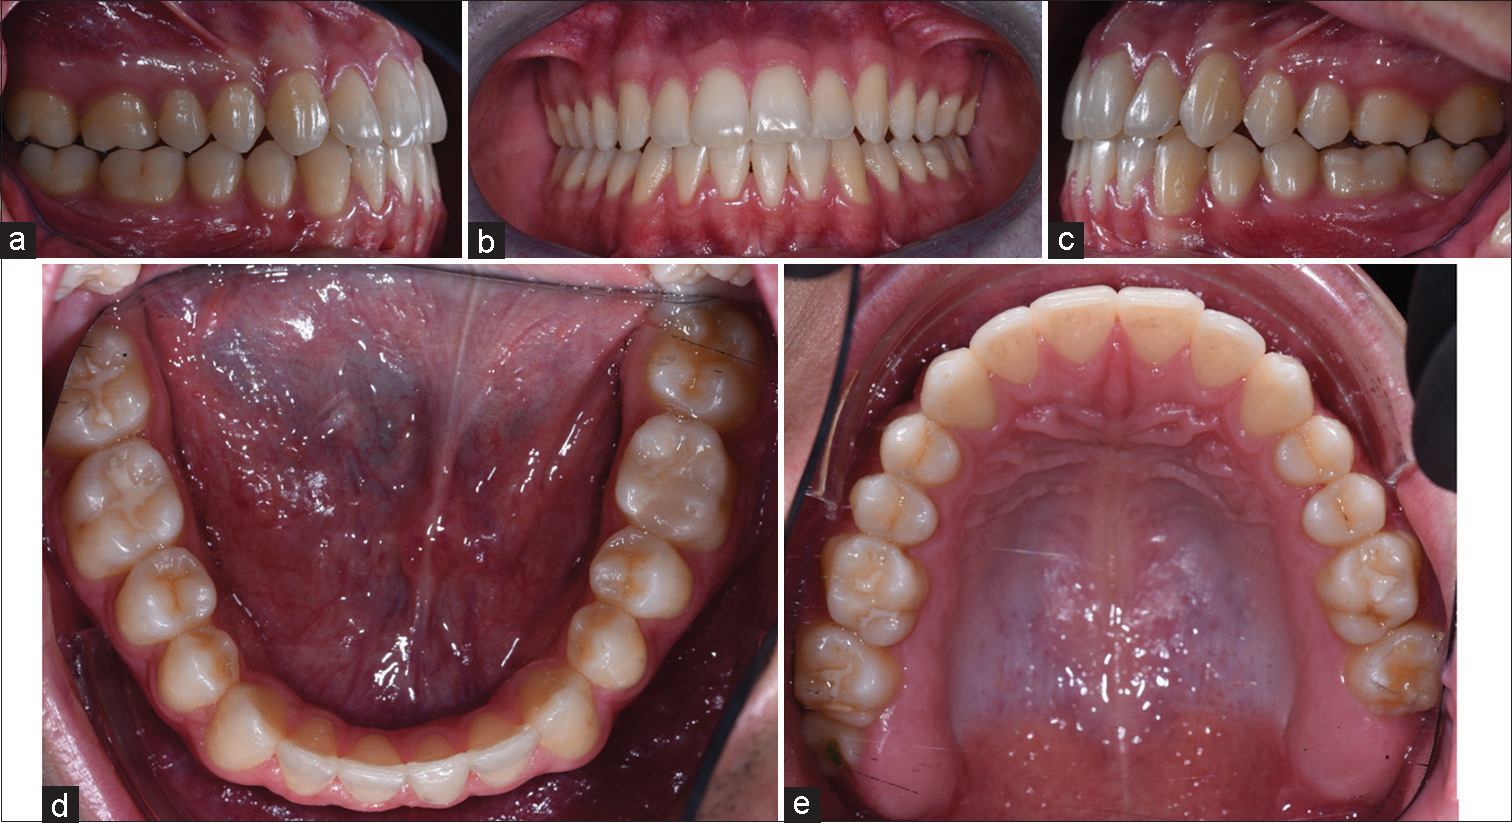 One-year follow-up intraoral pictures. (a) intra-oral right lateral view, (b) intra-oral frontal, (c) intra-oral left lateral view, (d) upper occlusal view, (e) lower occlusal view.